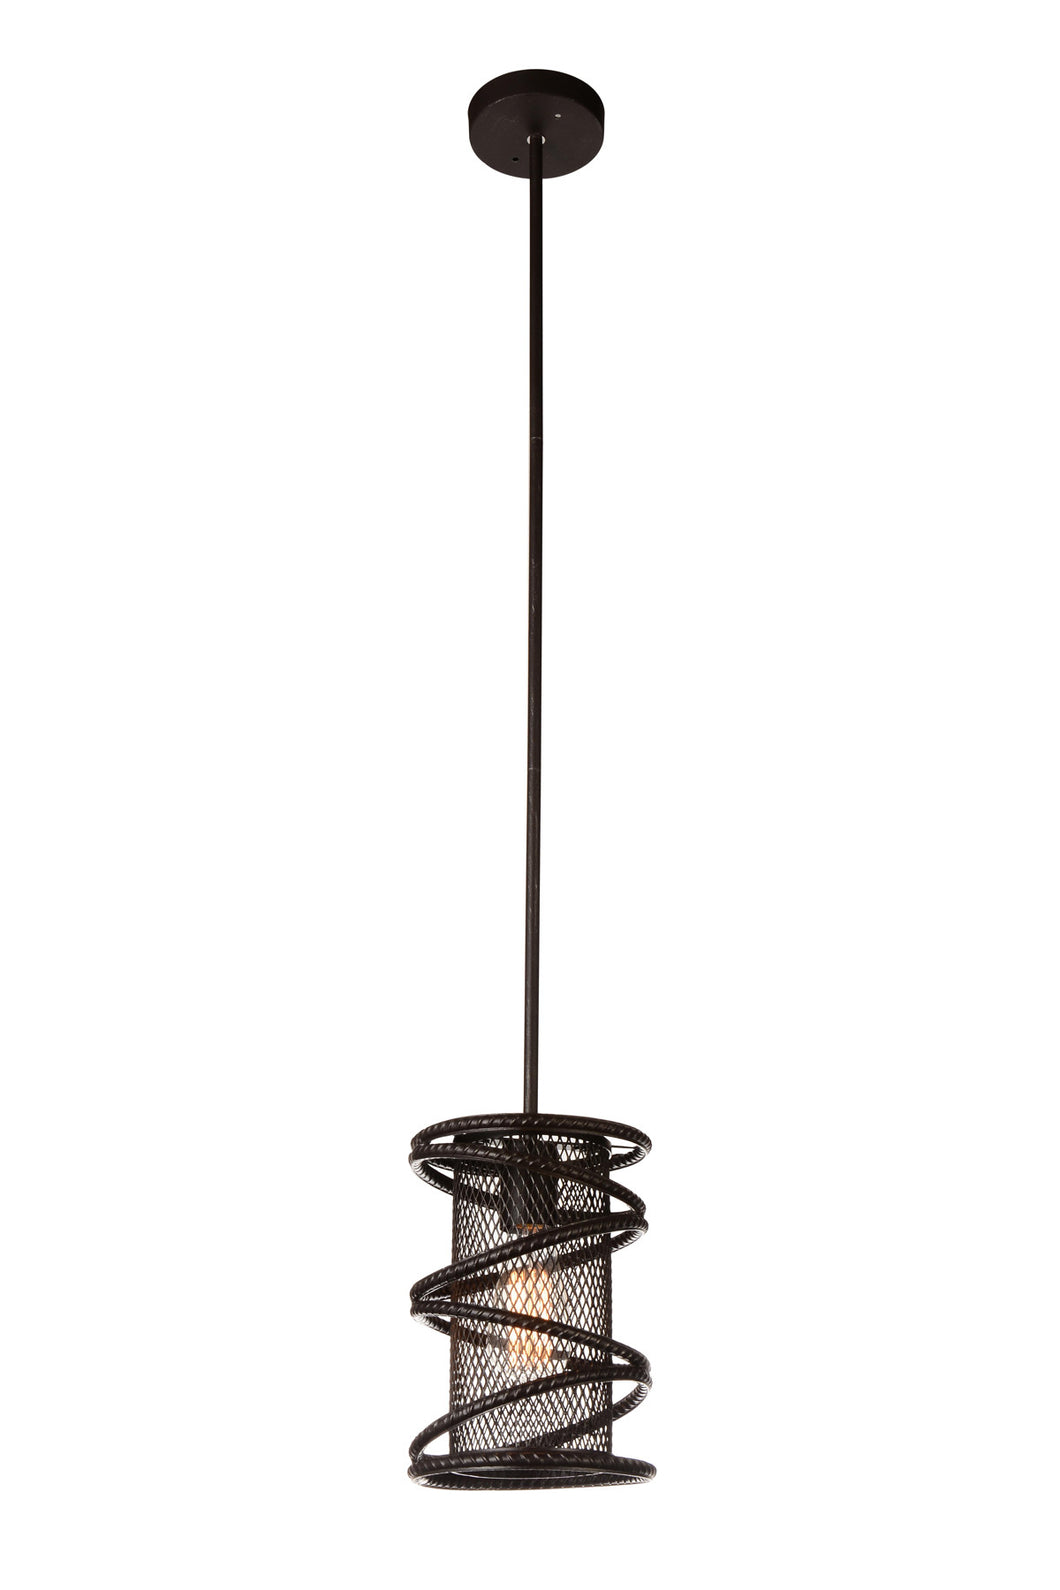 1 Light Down Mini Pendant with Brown finish